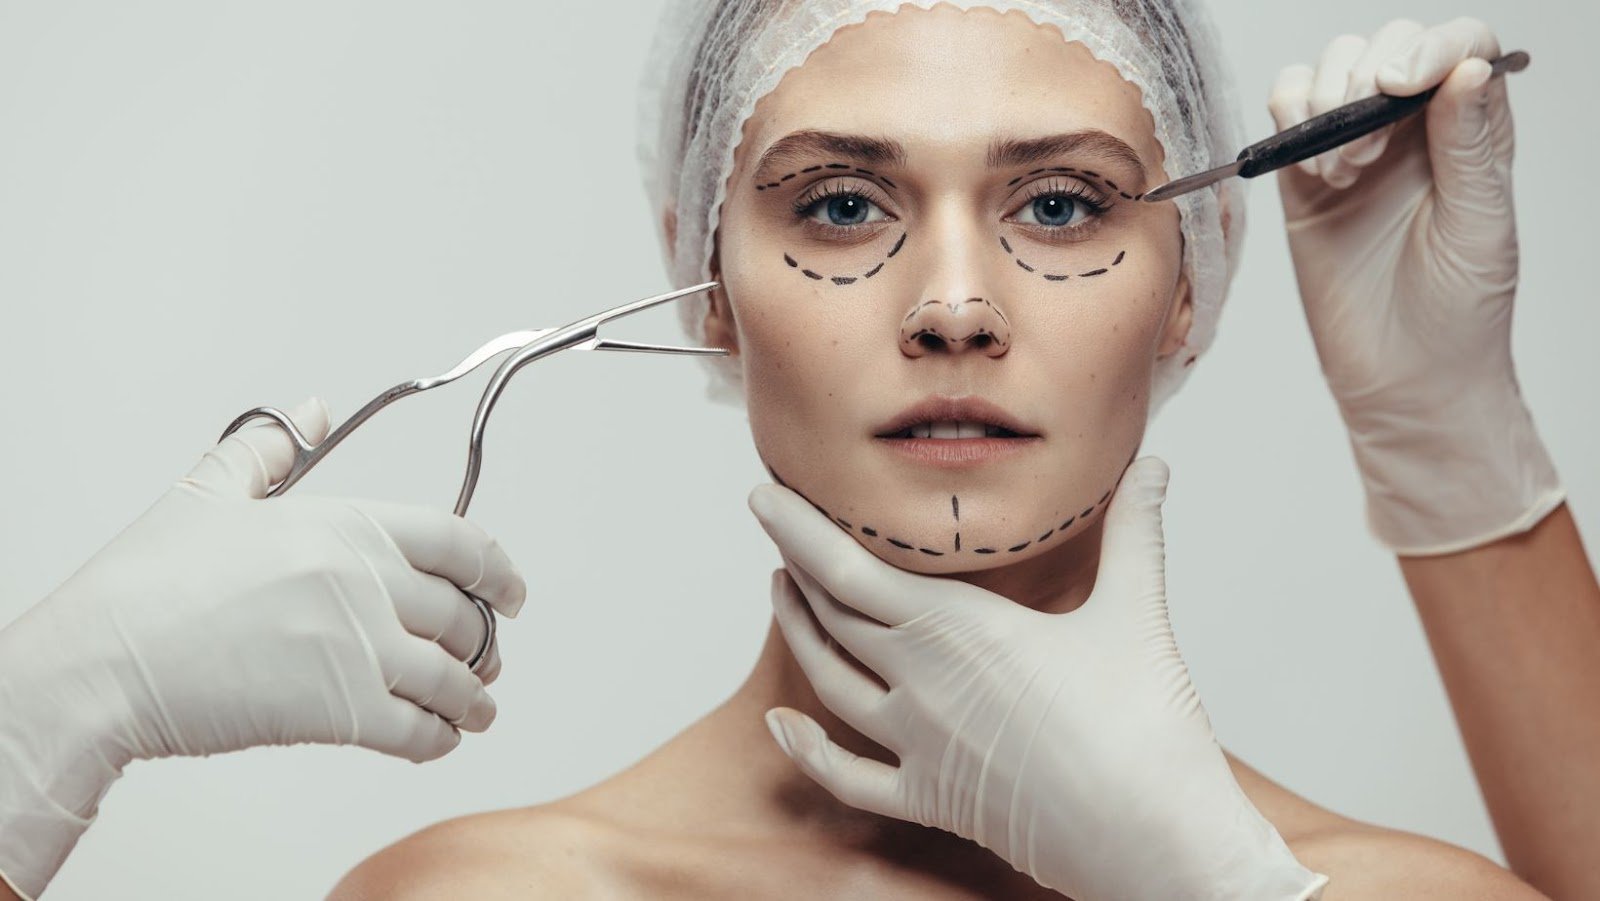 3 Types of Facial Implants You Should Know About